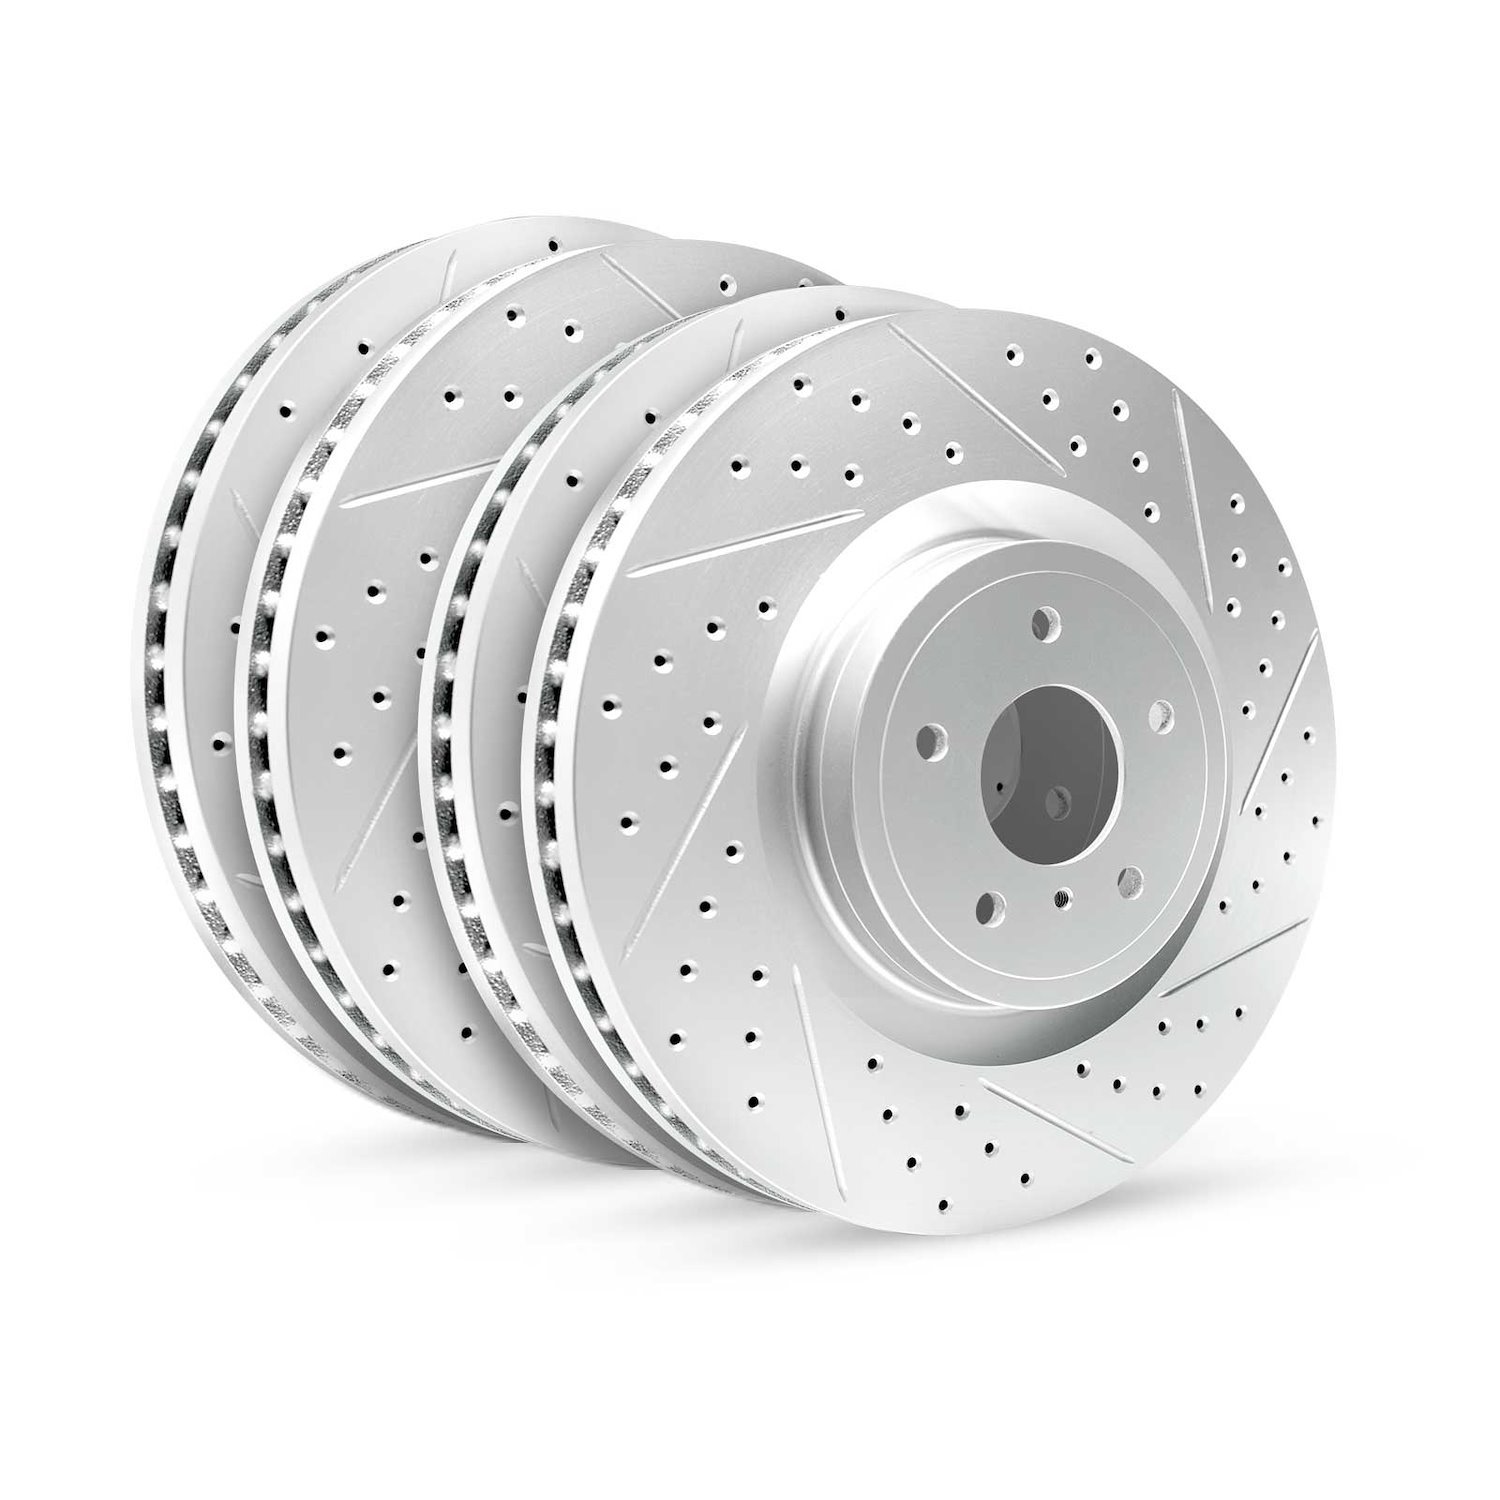 GEO-Carbon Drilled/Slotted Rotors, 1993-2006 Infiniti/Nissan, Position: Front/Rear